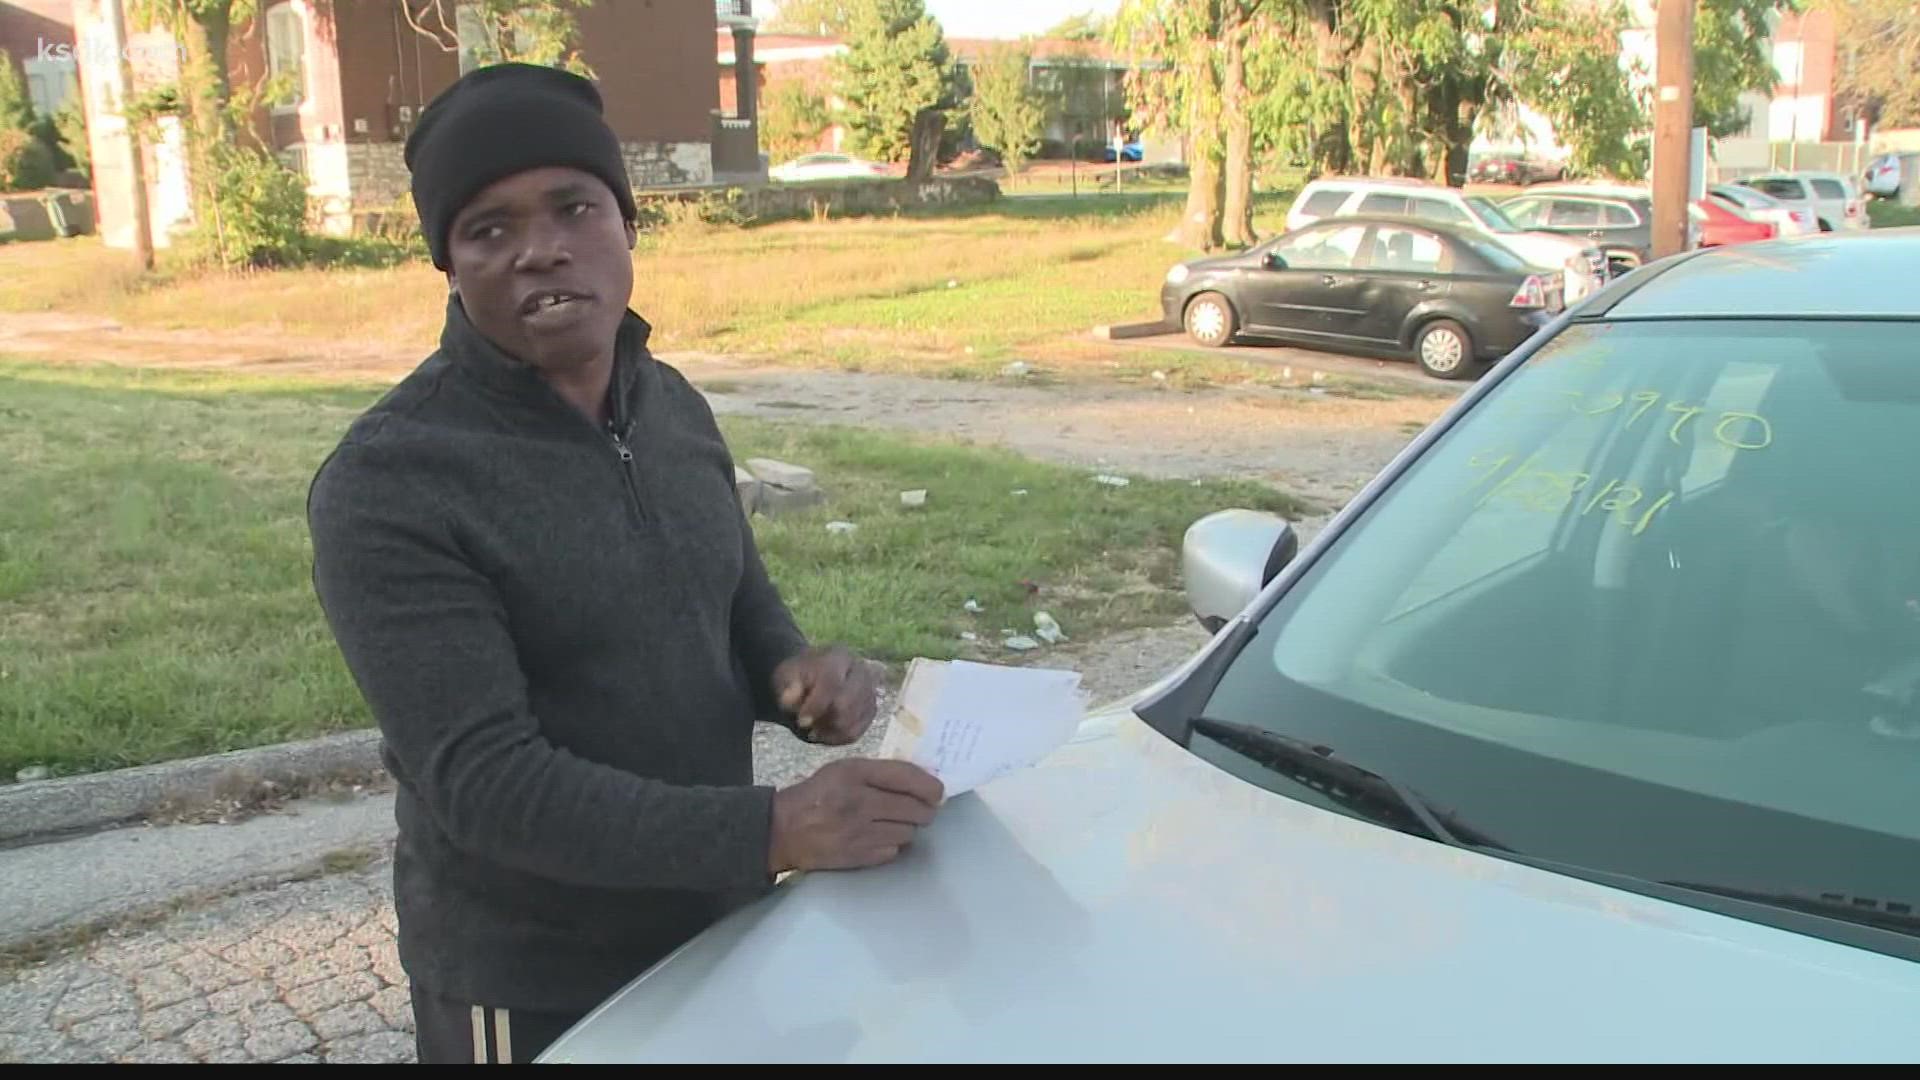 Konateh, 48, said he's been trying since Friday to give St. Louis police copies of two photos and paperwork he insists belong to a woman who carjacked him